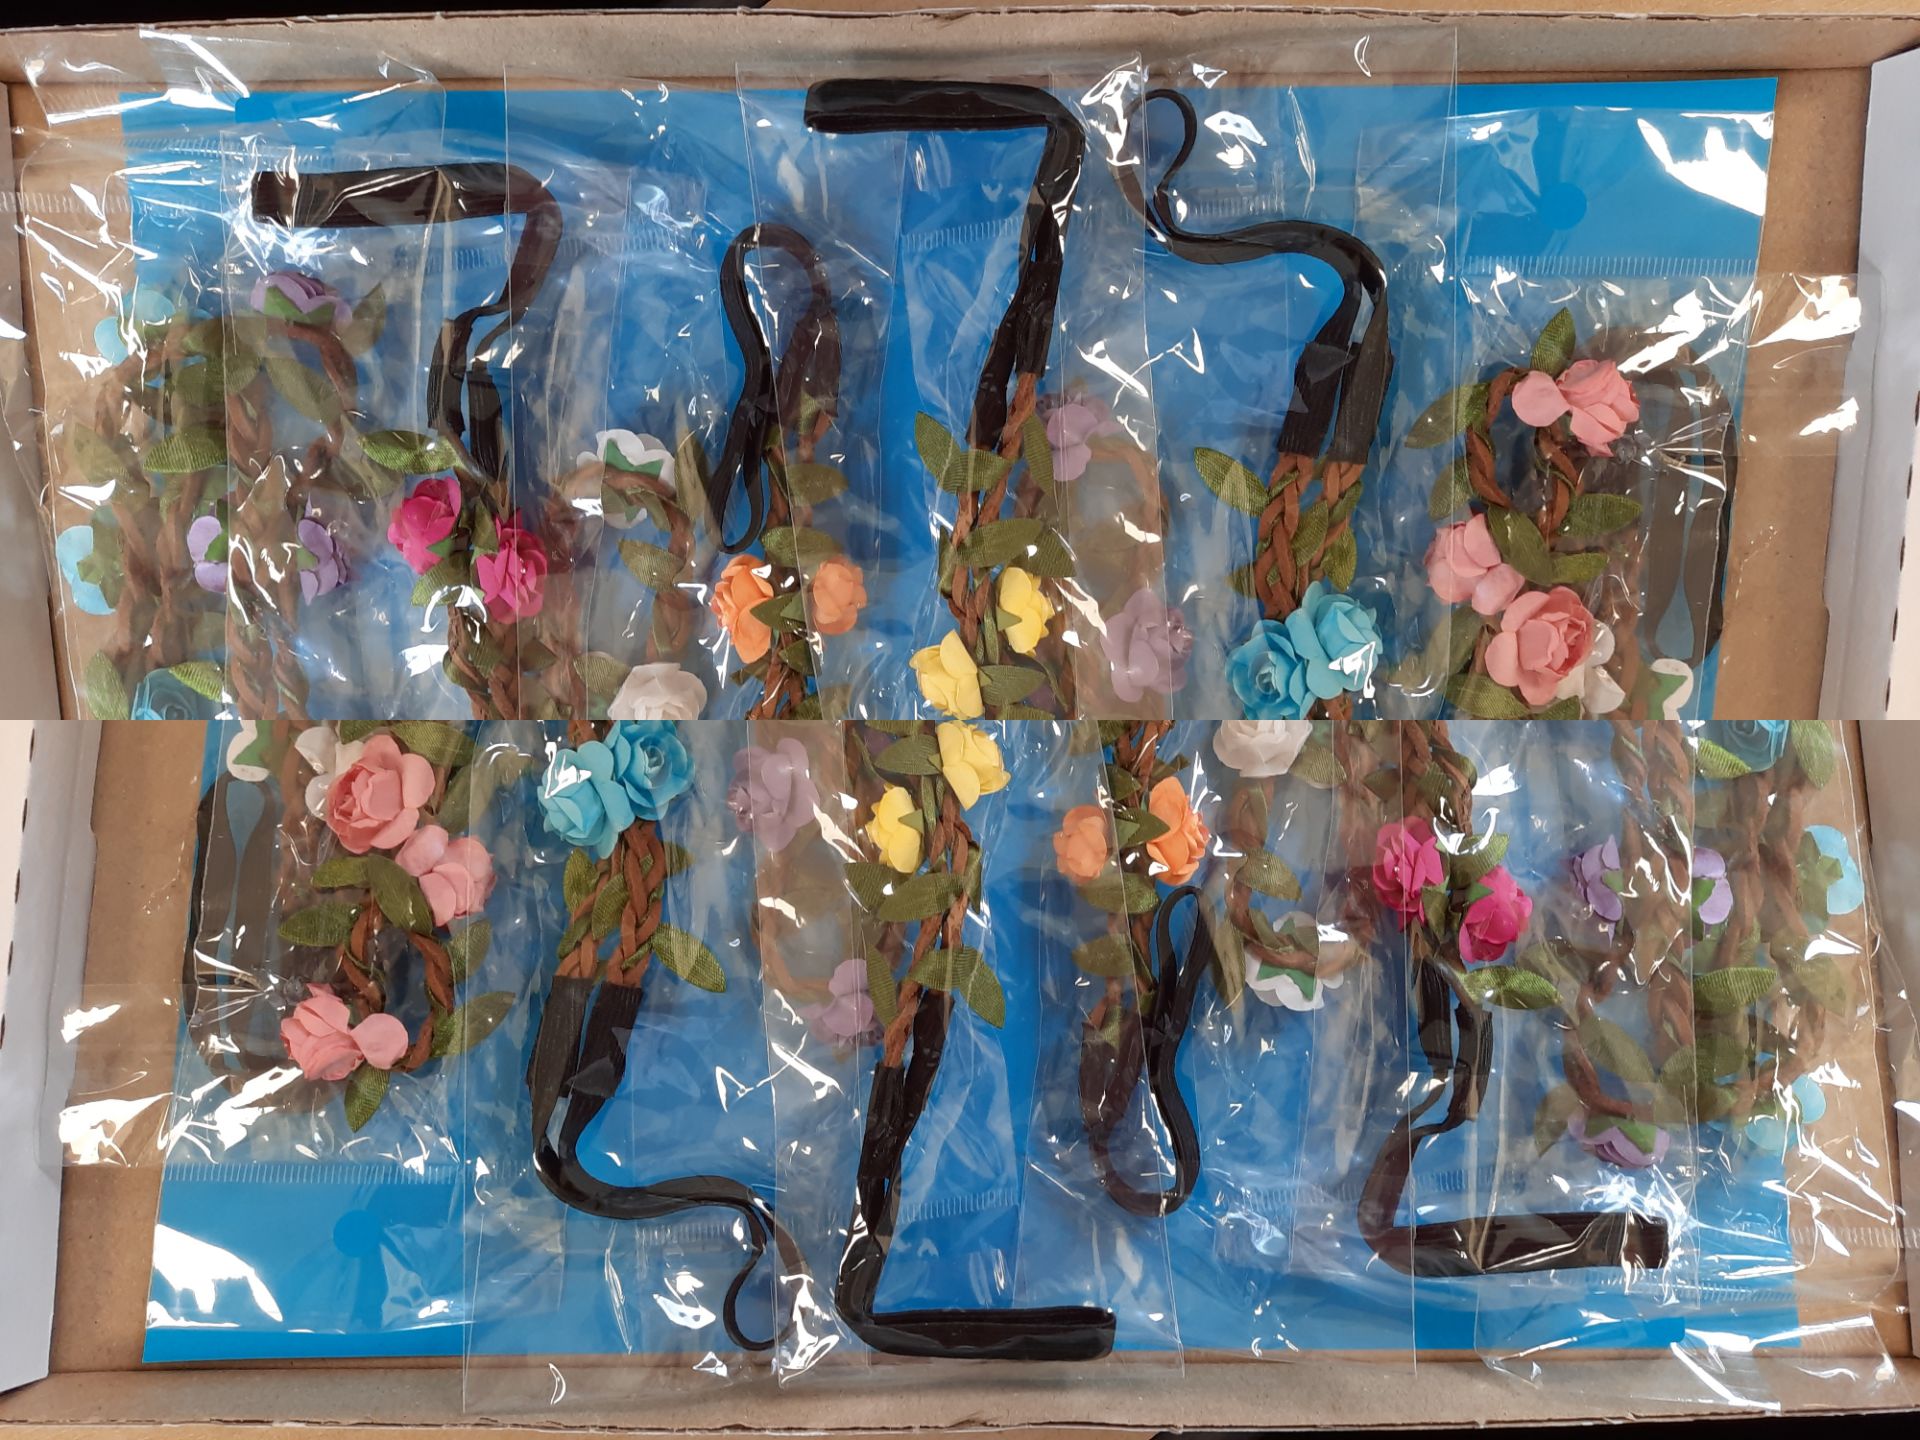 Leather Band Floral Headband x 50 - Image 2 of 3